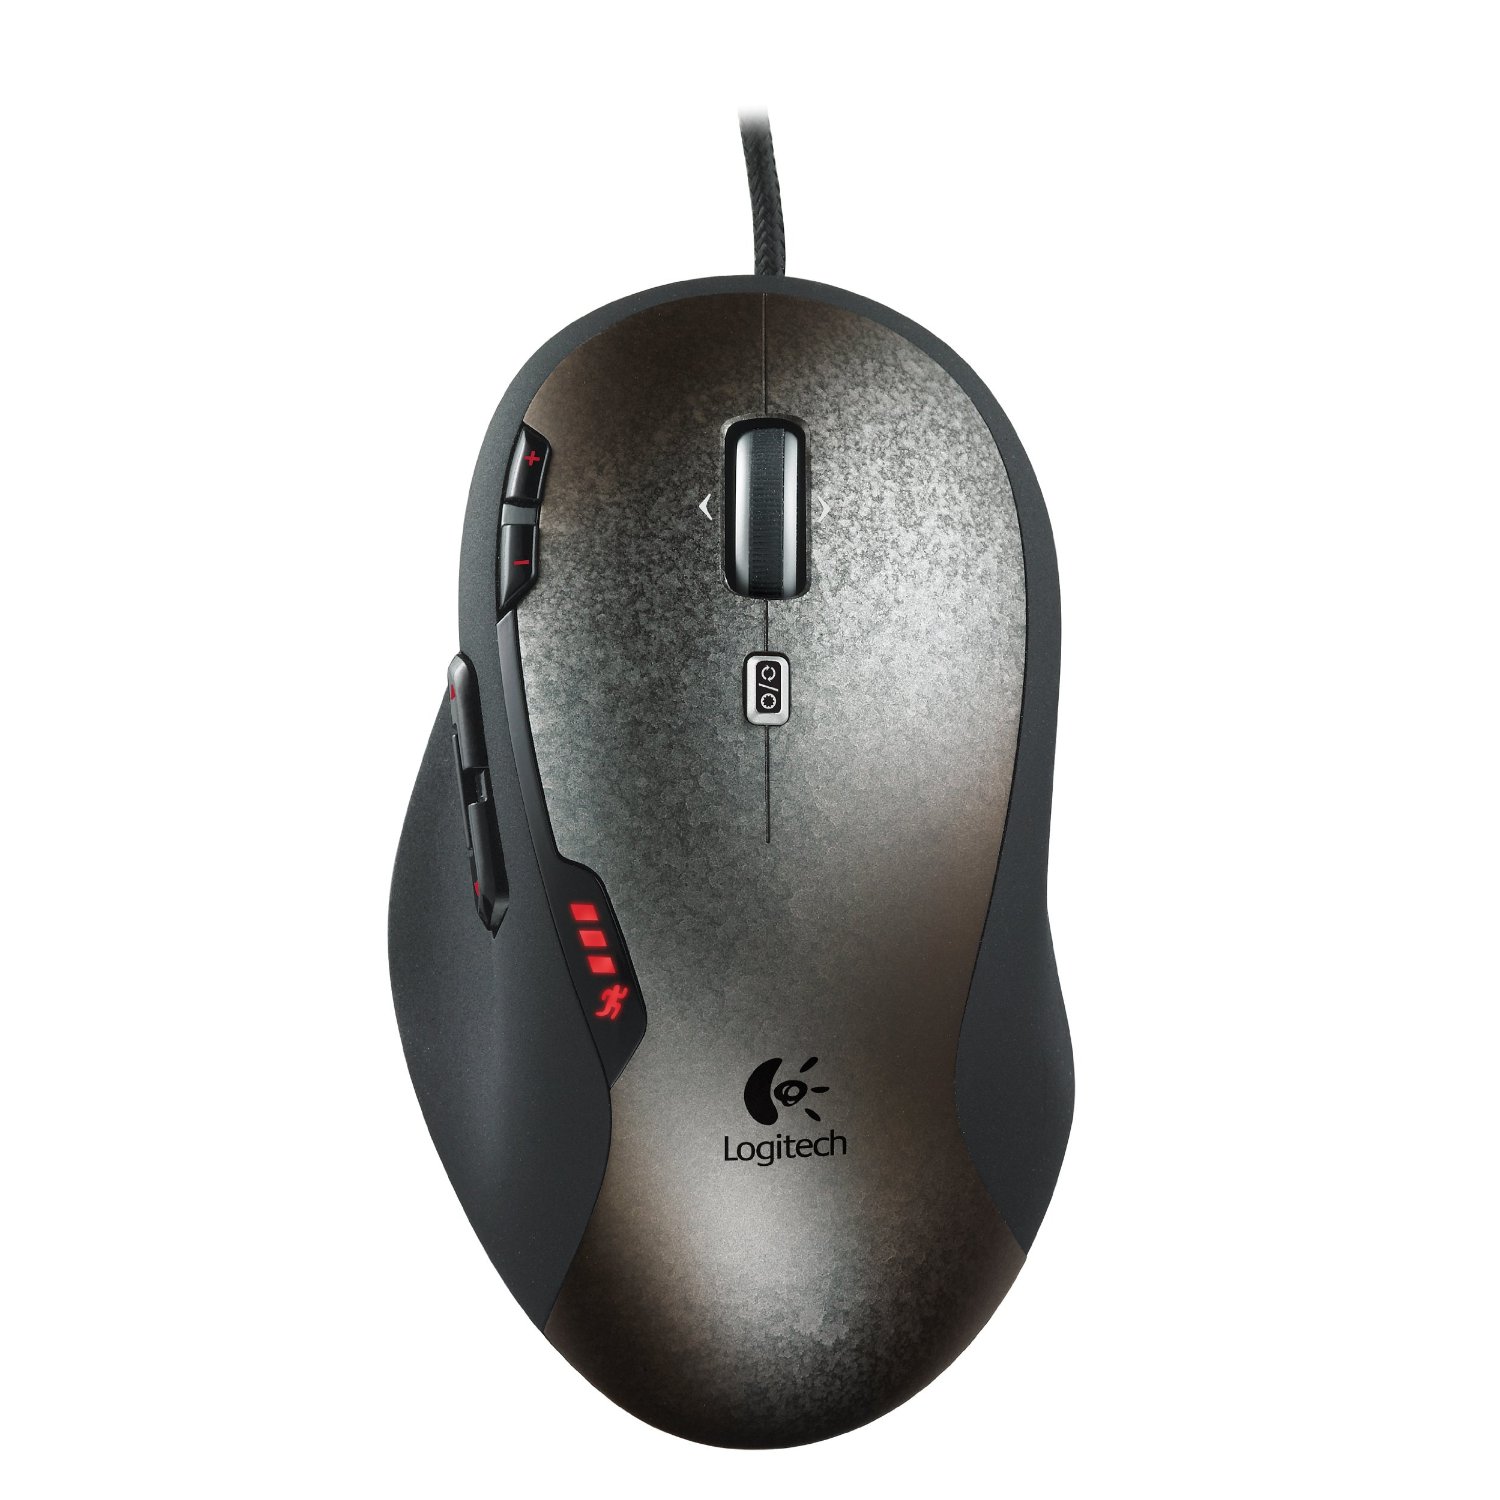 http://thetechjournal.com/wp-content/uploads/images/1110/1317524254-logitech-g500-programmable-gaming-mouse-10.jpg